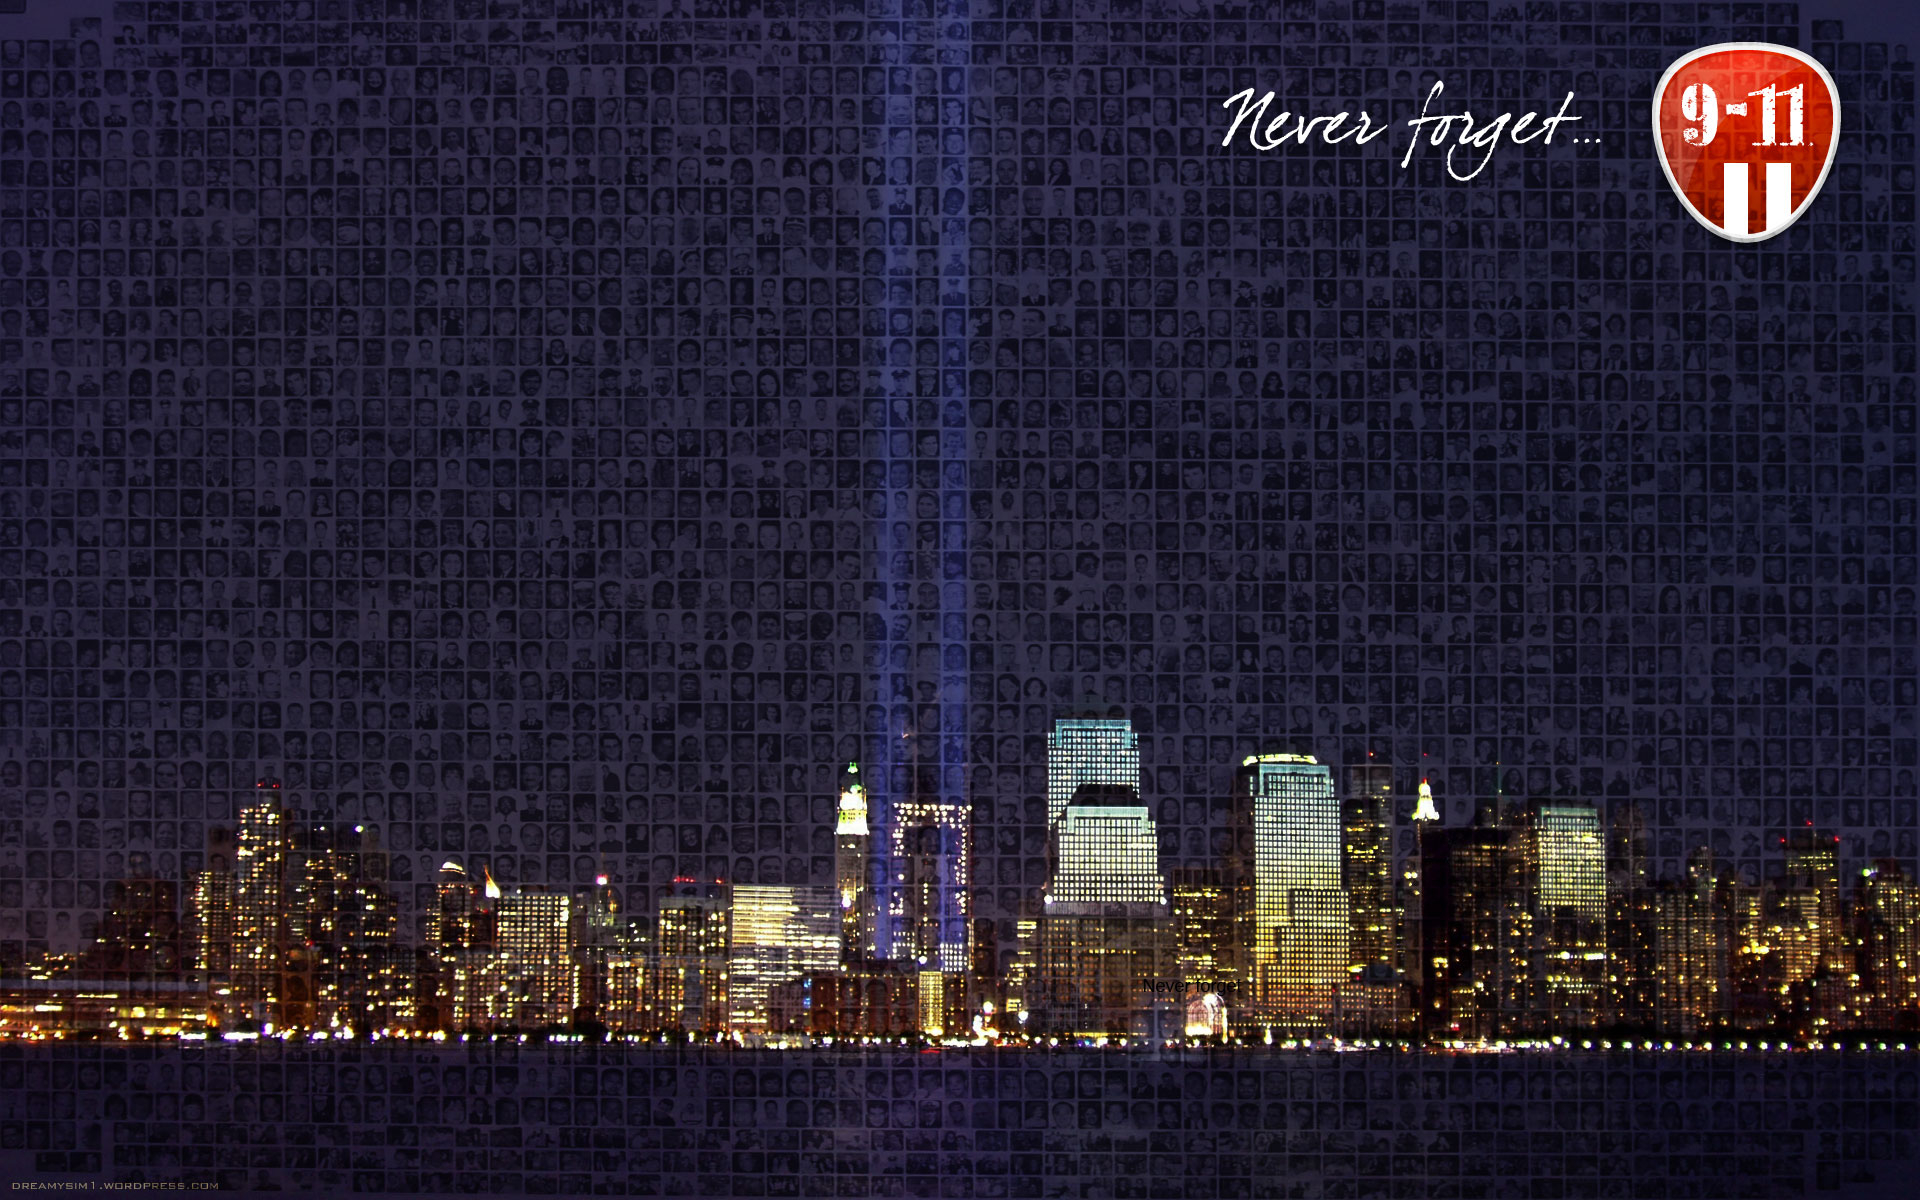 1920x1200 Free download 11 tribute wallpaper displaying 19 images for 9 11 tribute wallpaper [] for your Desktop, Mobile \u0026 Tablet | Explore 42+ 9 11 Tribute Wallpapers | 9 11 Tribute Wallpapers, 9 11 Wallpaper, 9 11 Wallpaper Desktop